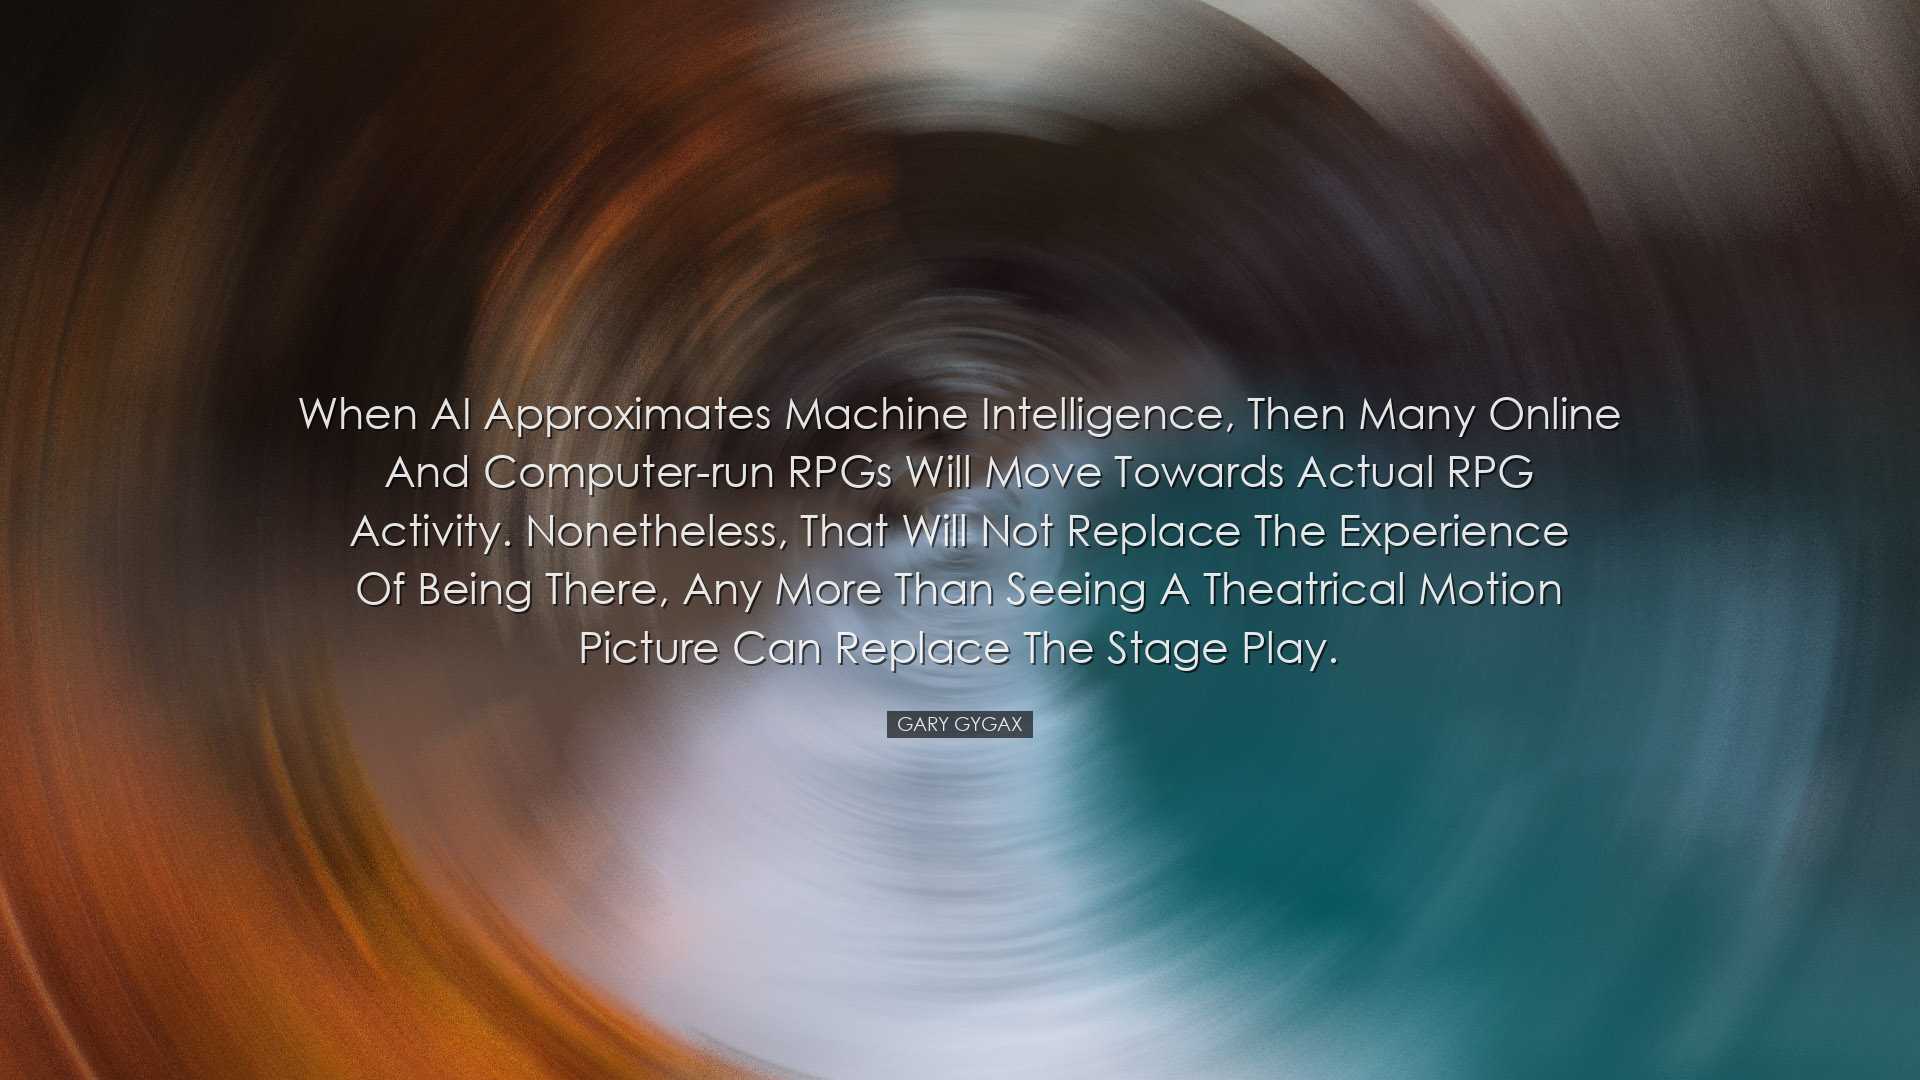 When AI approximates Machine Intelligence, then many online and co